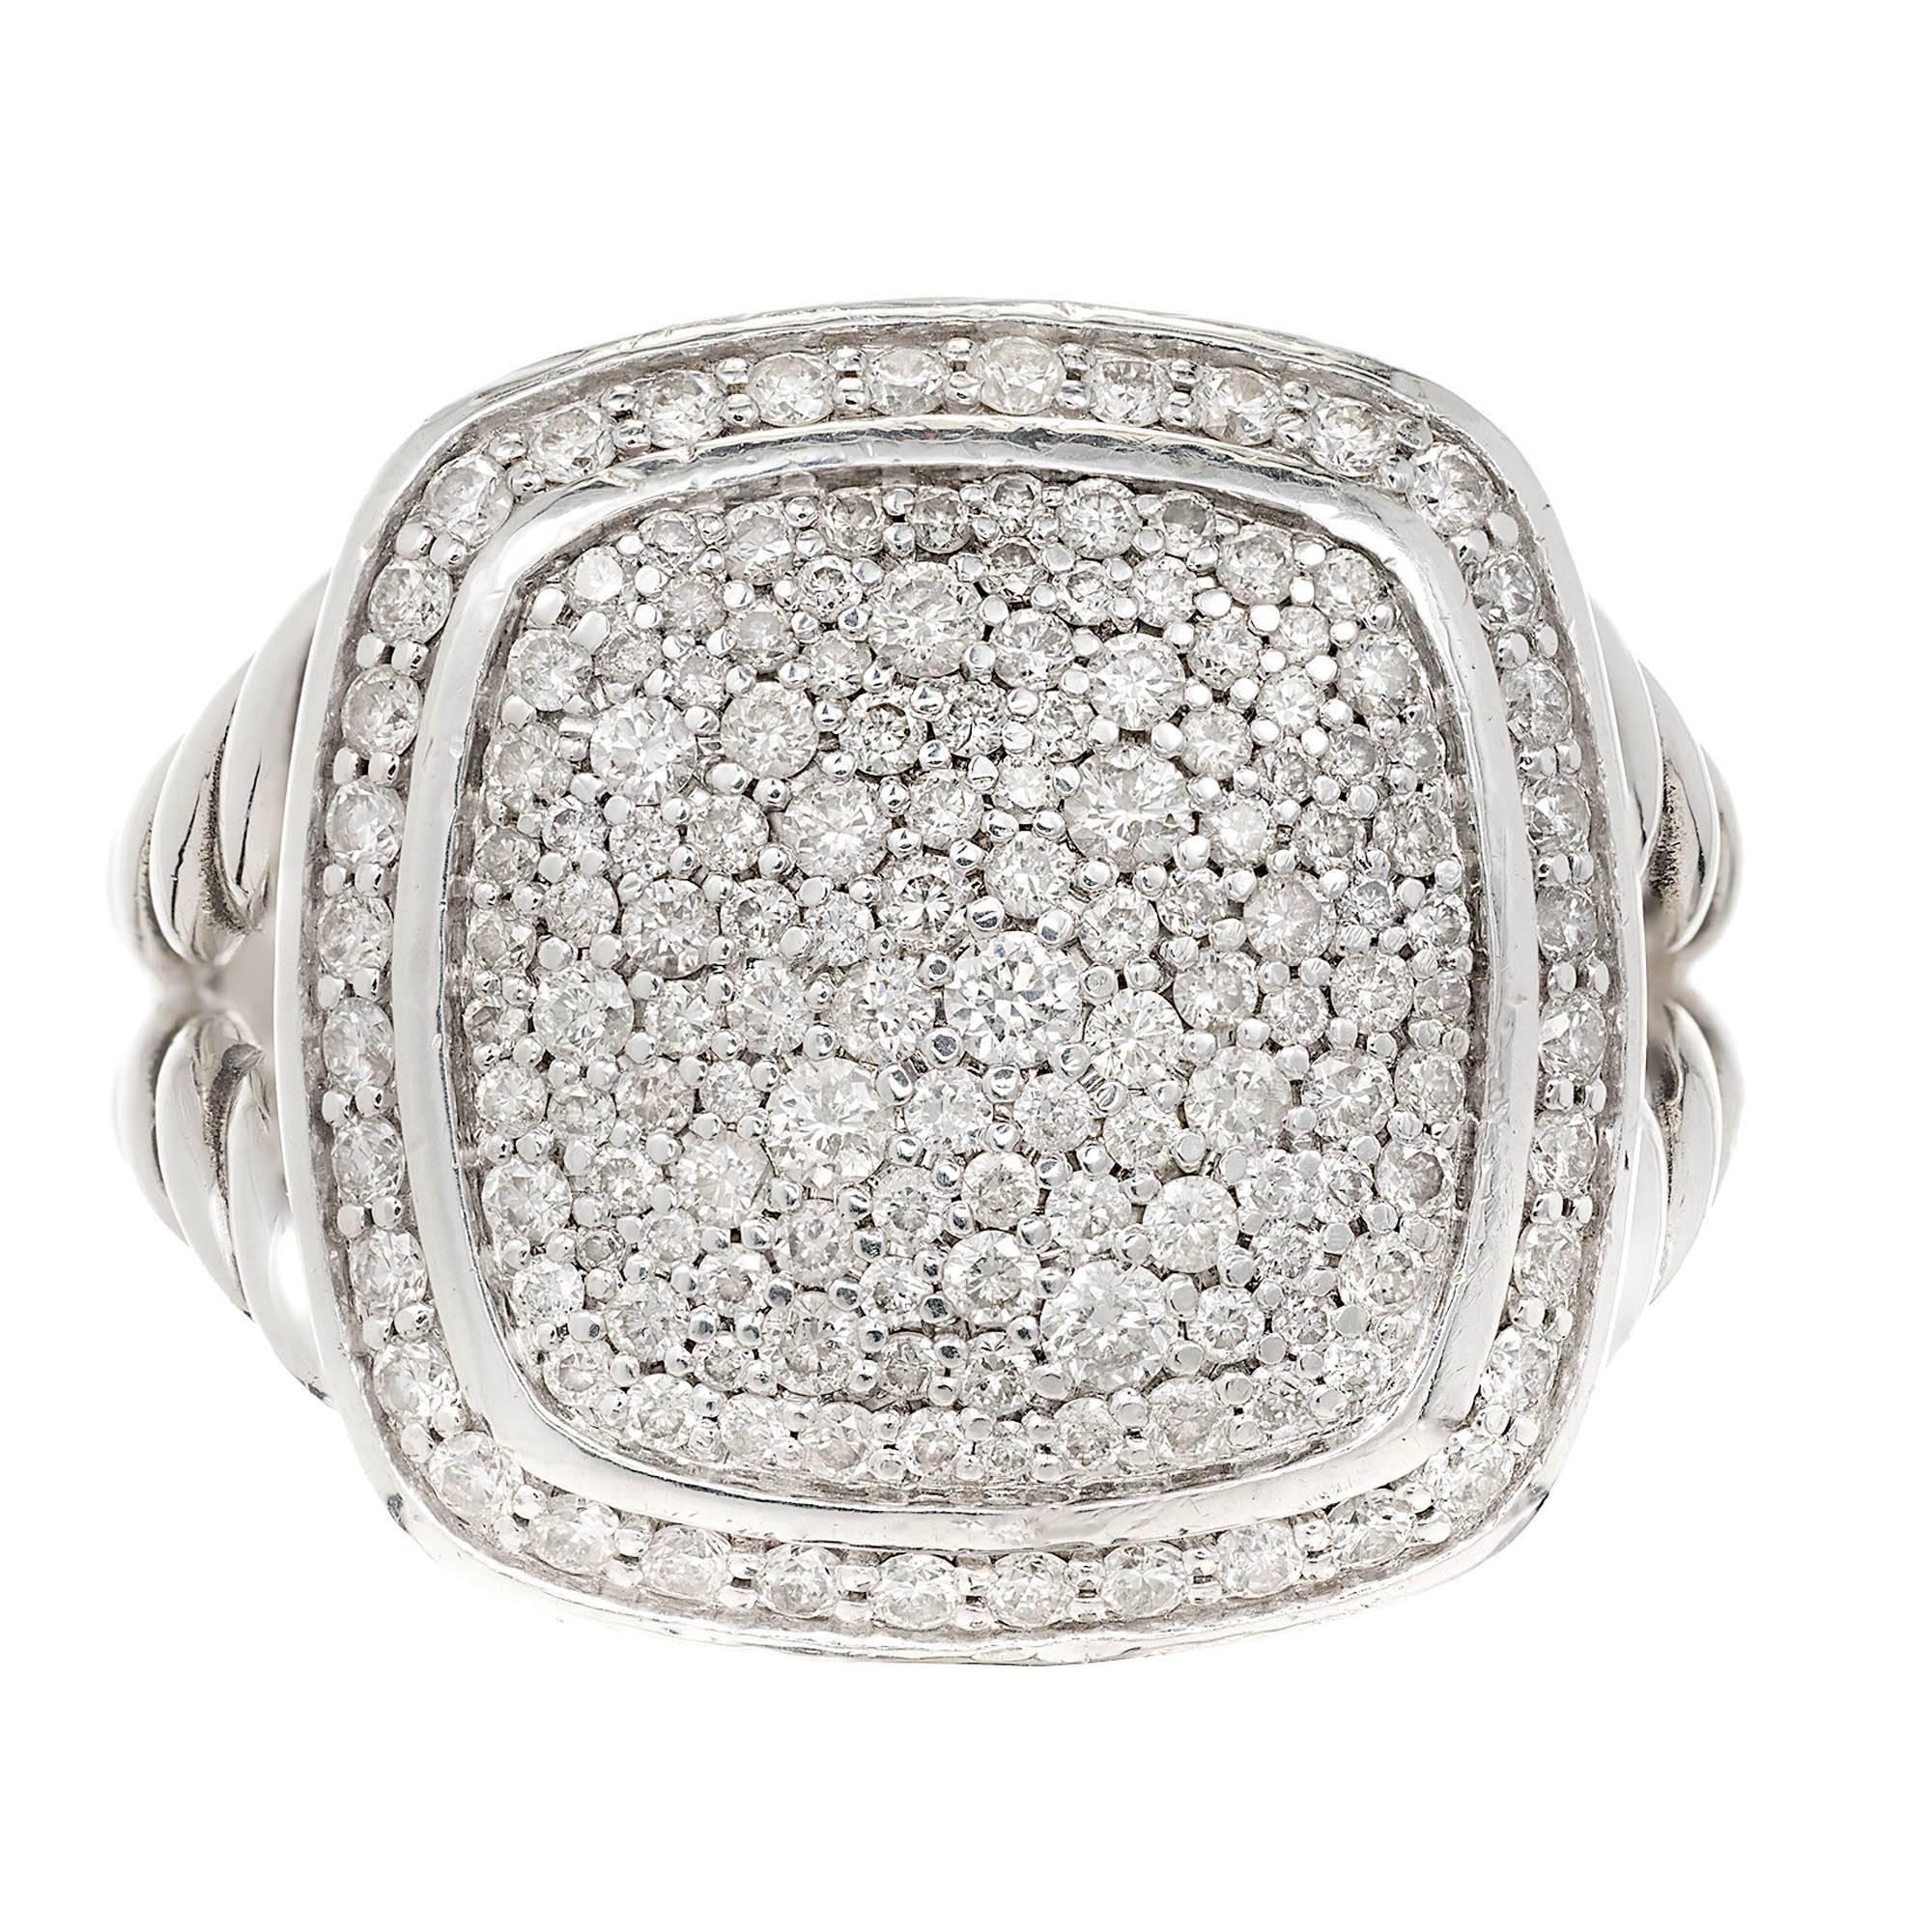 David Yurman silver Albion cocktail ring with Diamonds. 17mm top, 6mm wide split shank.

170 round full cut Diamonds, approx. total weight 1.82cts, H – I, SI
Size 8 and not sizable
925 Sterling silver
Tested: 925 Sterling silver
Hallmark: David